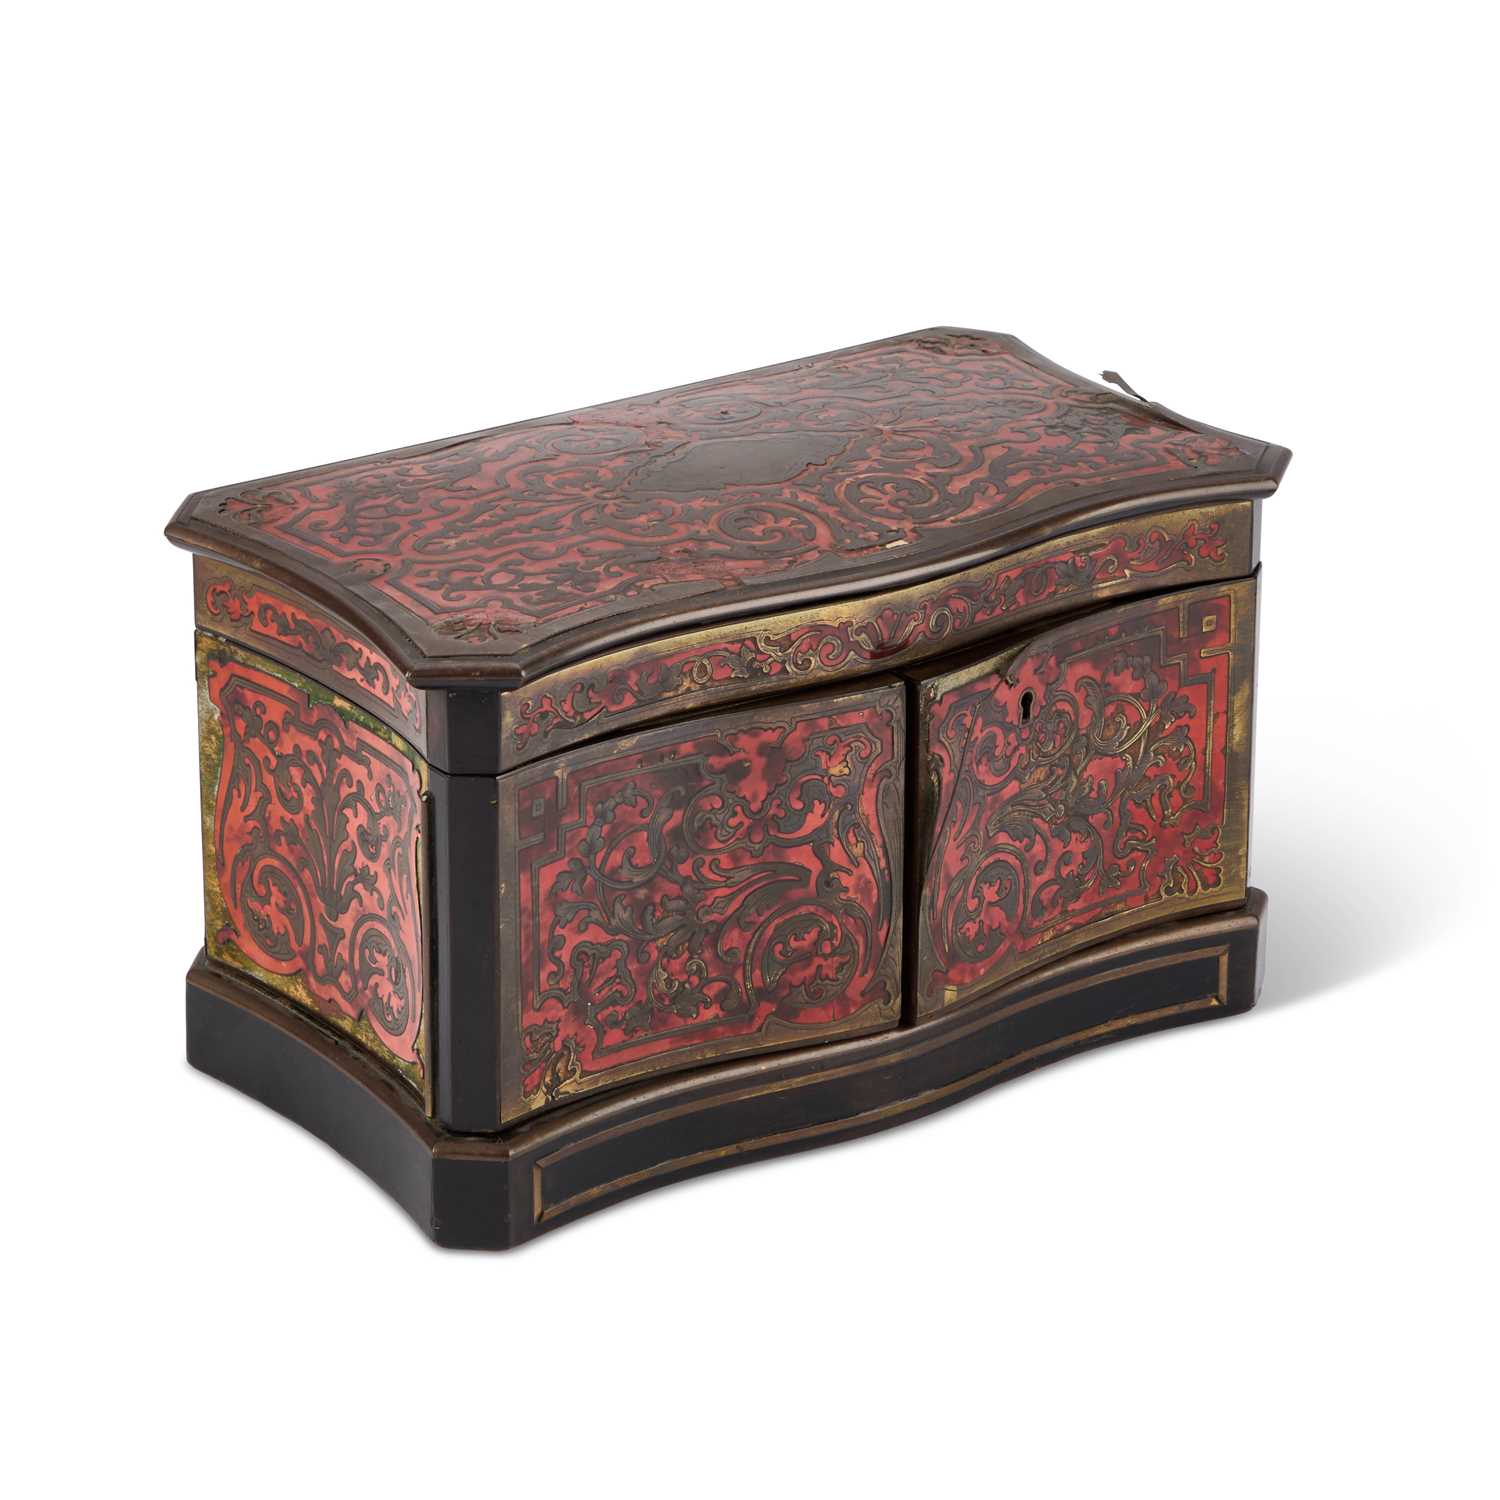 A MID-19TH CENTURY FRENCH 'BOULLE' TEA CADDY